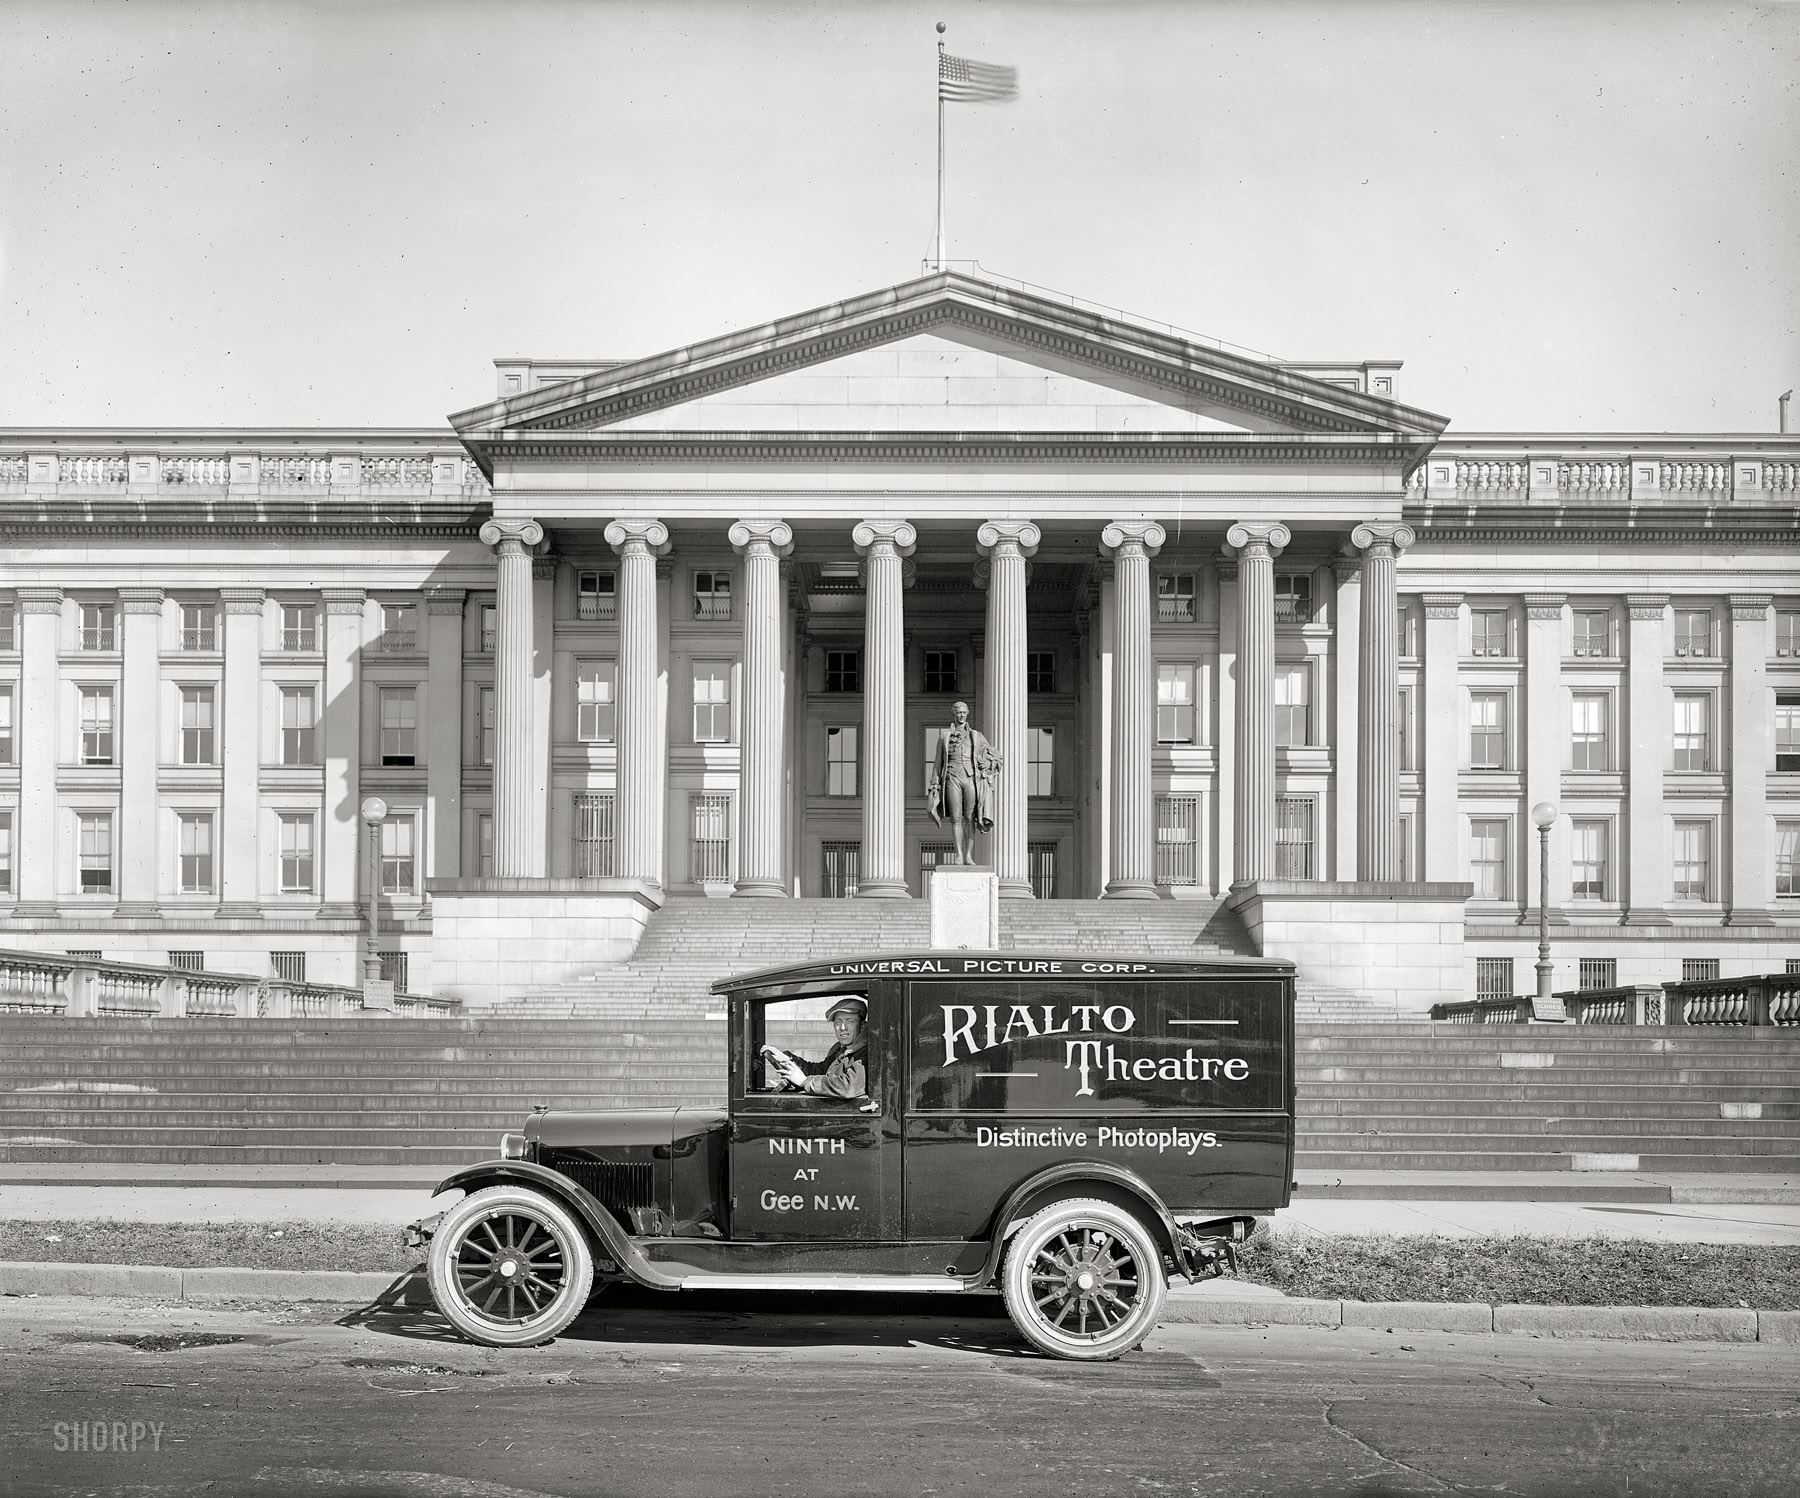 Washington circa 1925. "Rialto Theatre truck." With the U.S. Treasury as a backdrop. National Photo Company Collection glass negative. View full size.